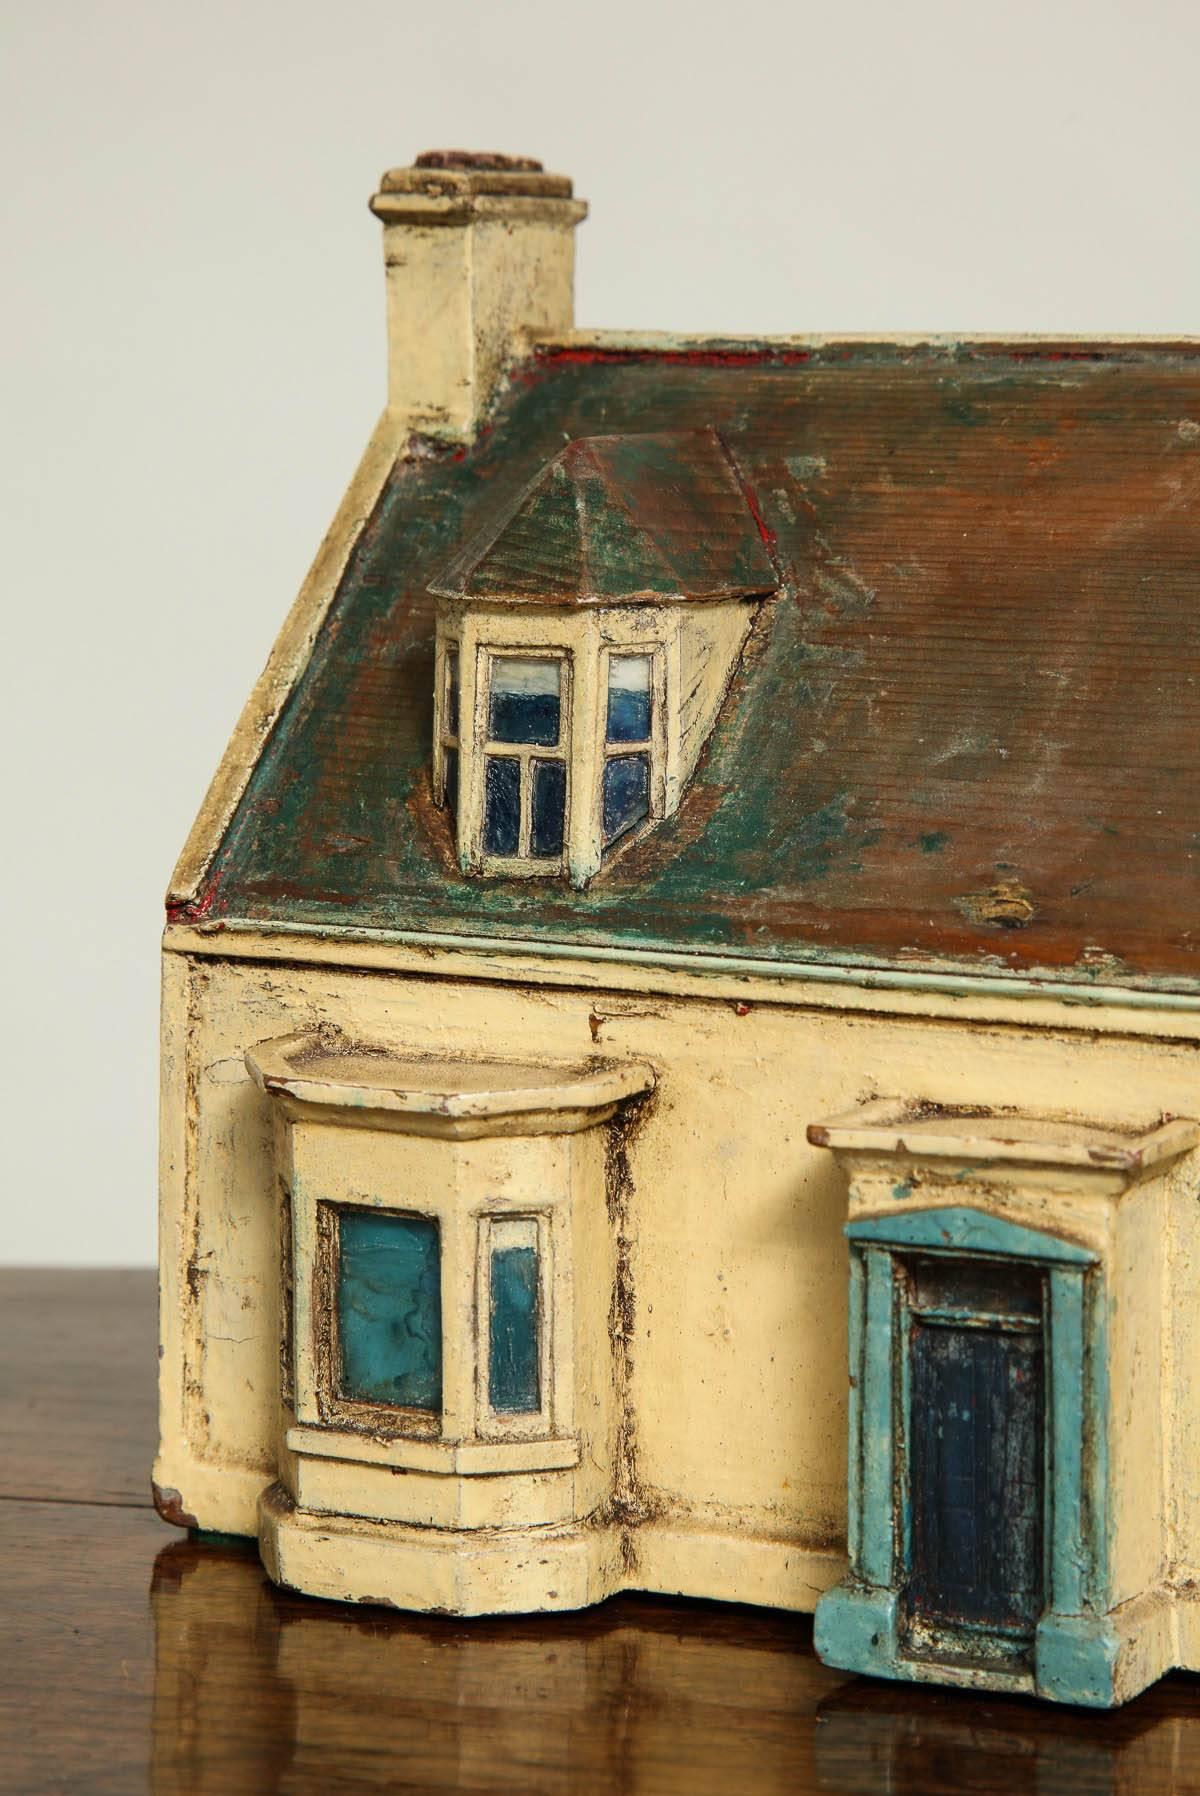 A model of a freestanding house with central hall and pedimented front door flanked by two bow fronted windows with dormer windows above and end chimney stacks. In original ochre and turquoise paint with brown painted roof and shingled dormers, with